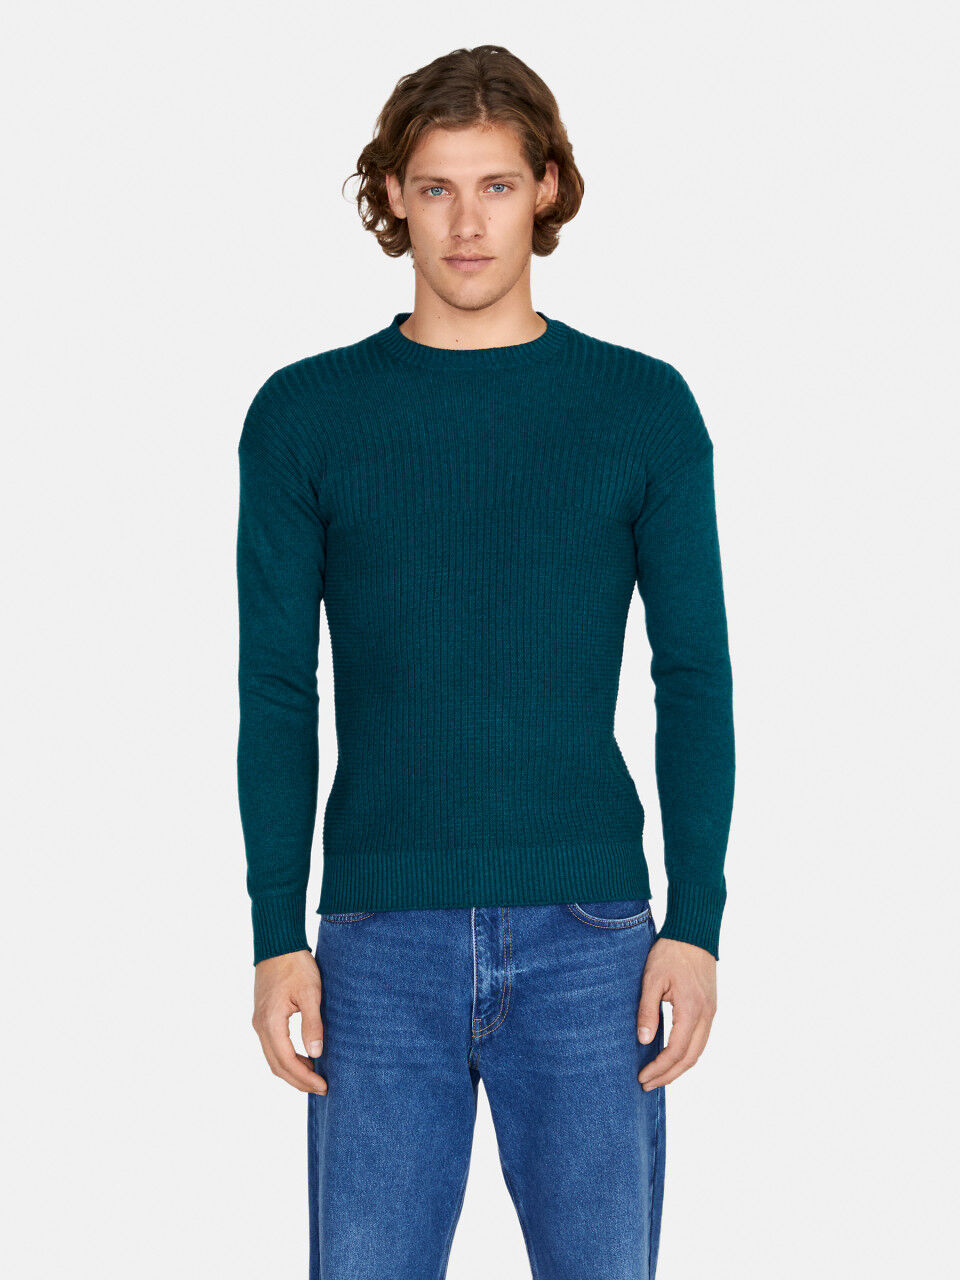 Sweater with stitching features